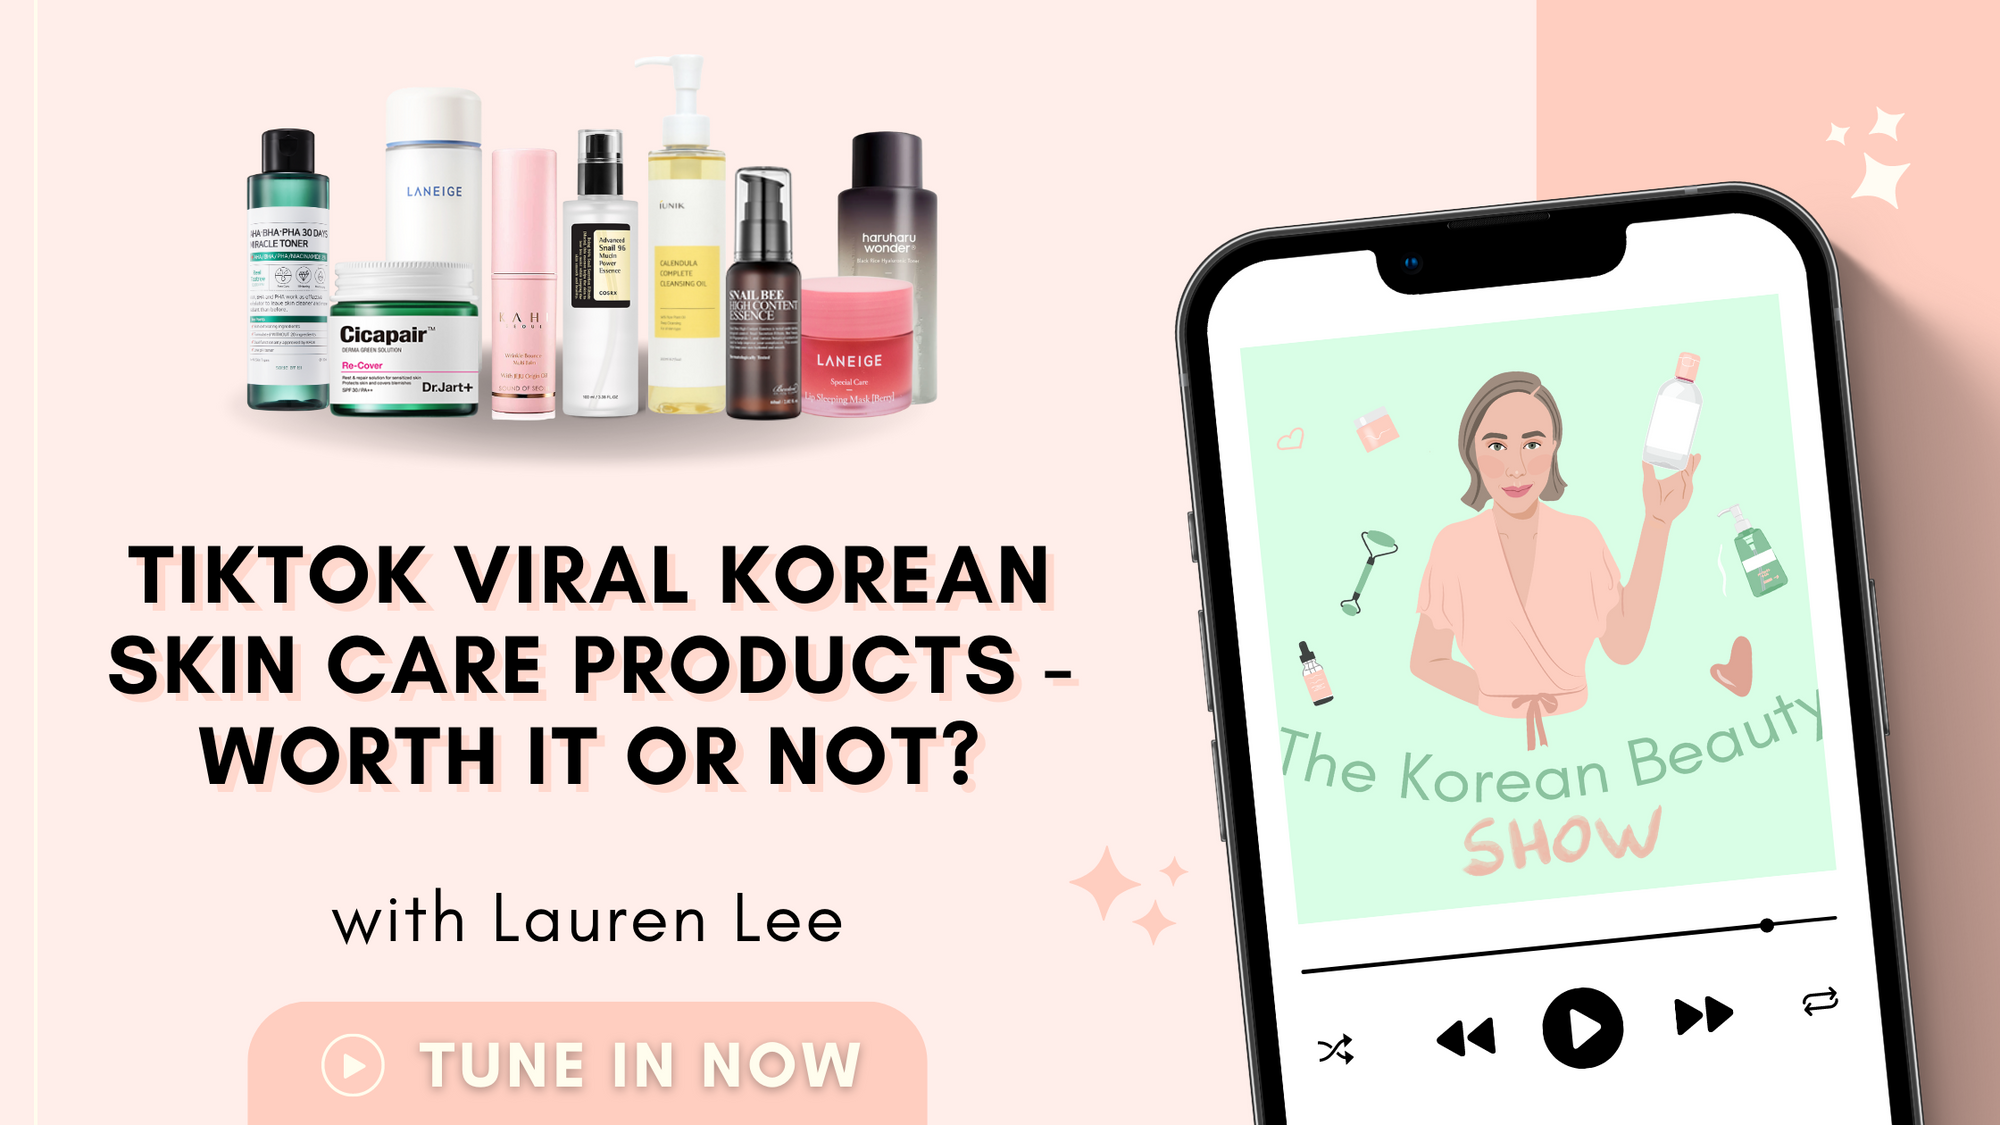 Viral skincare that is worth your money 🫶 #viralskincare #fyp #tikto